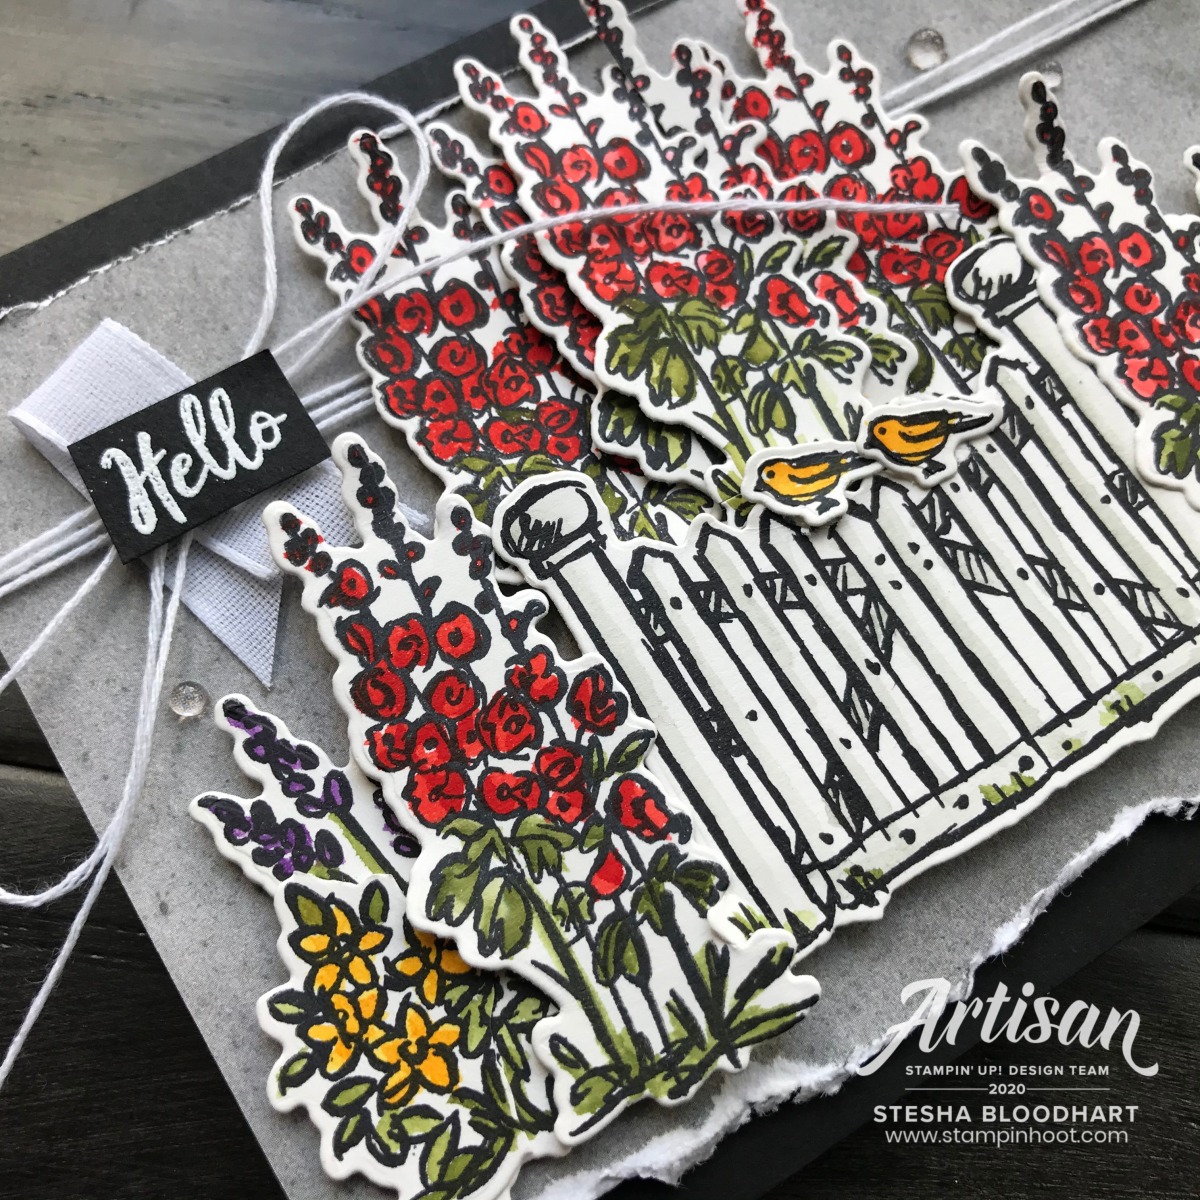 Card made with Grace's Garden Stamp Set & Garden Gateway Dies by Stampin' Up! Card created by 2020 Artisan Stesha Bloodhart, Stampin' Hoot! 